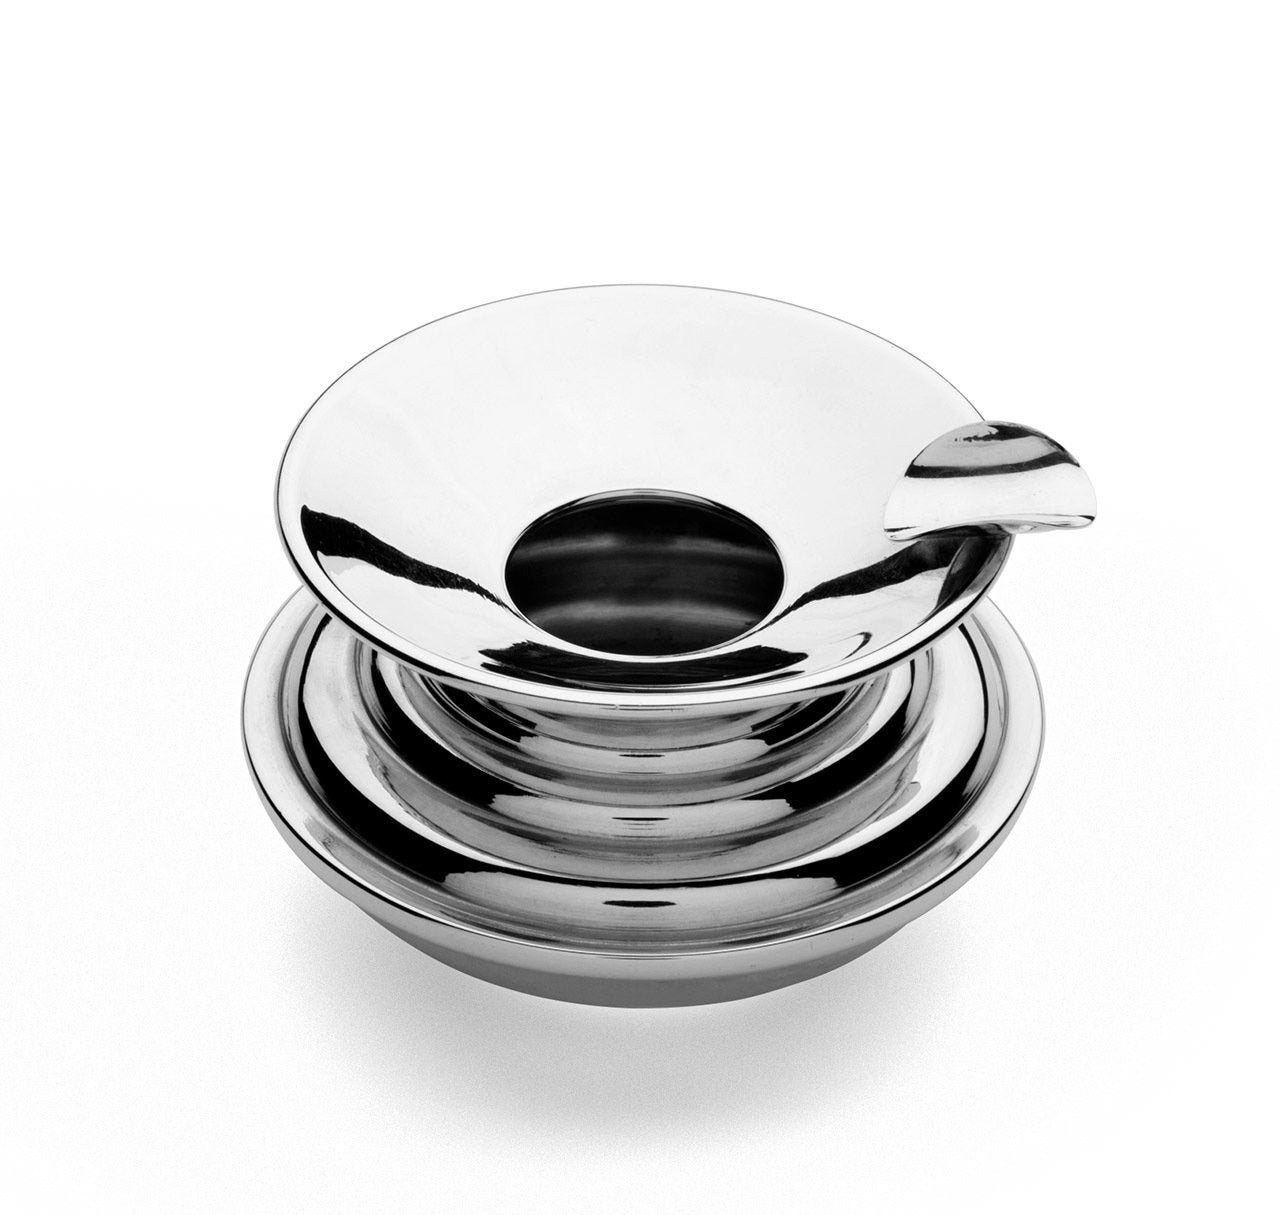 Cartier Sterling Silver Personal Ashtray